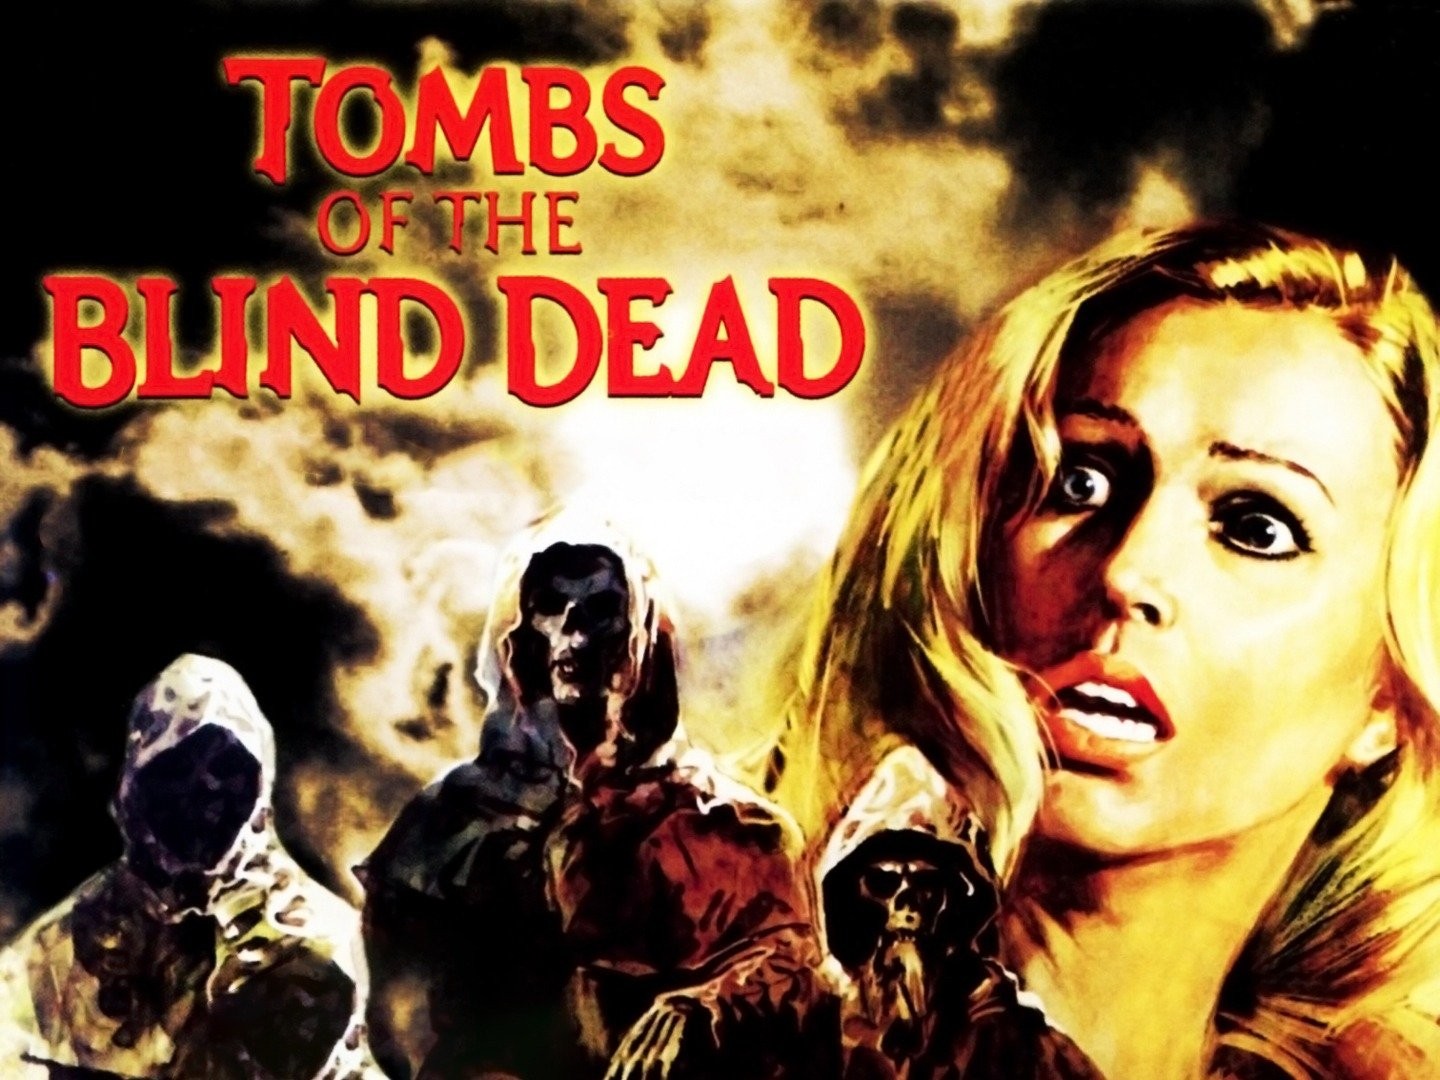 45-facts-about-the-movie-tombs-of-the-blind-dead